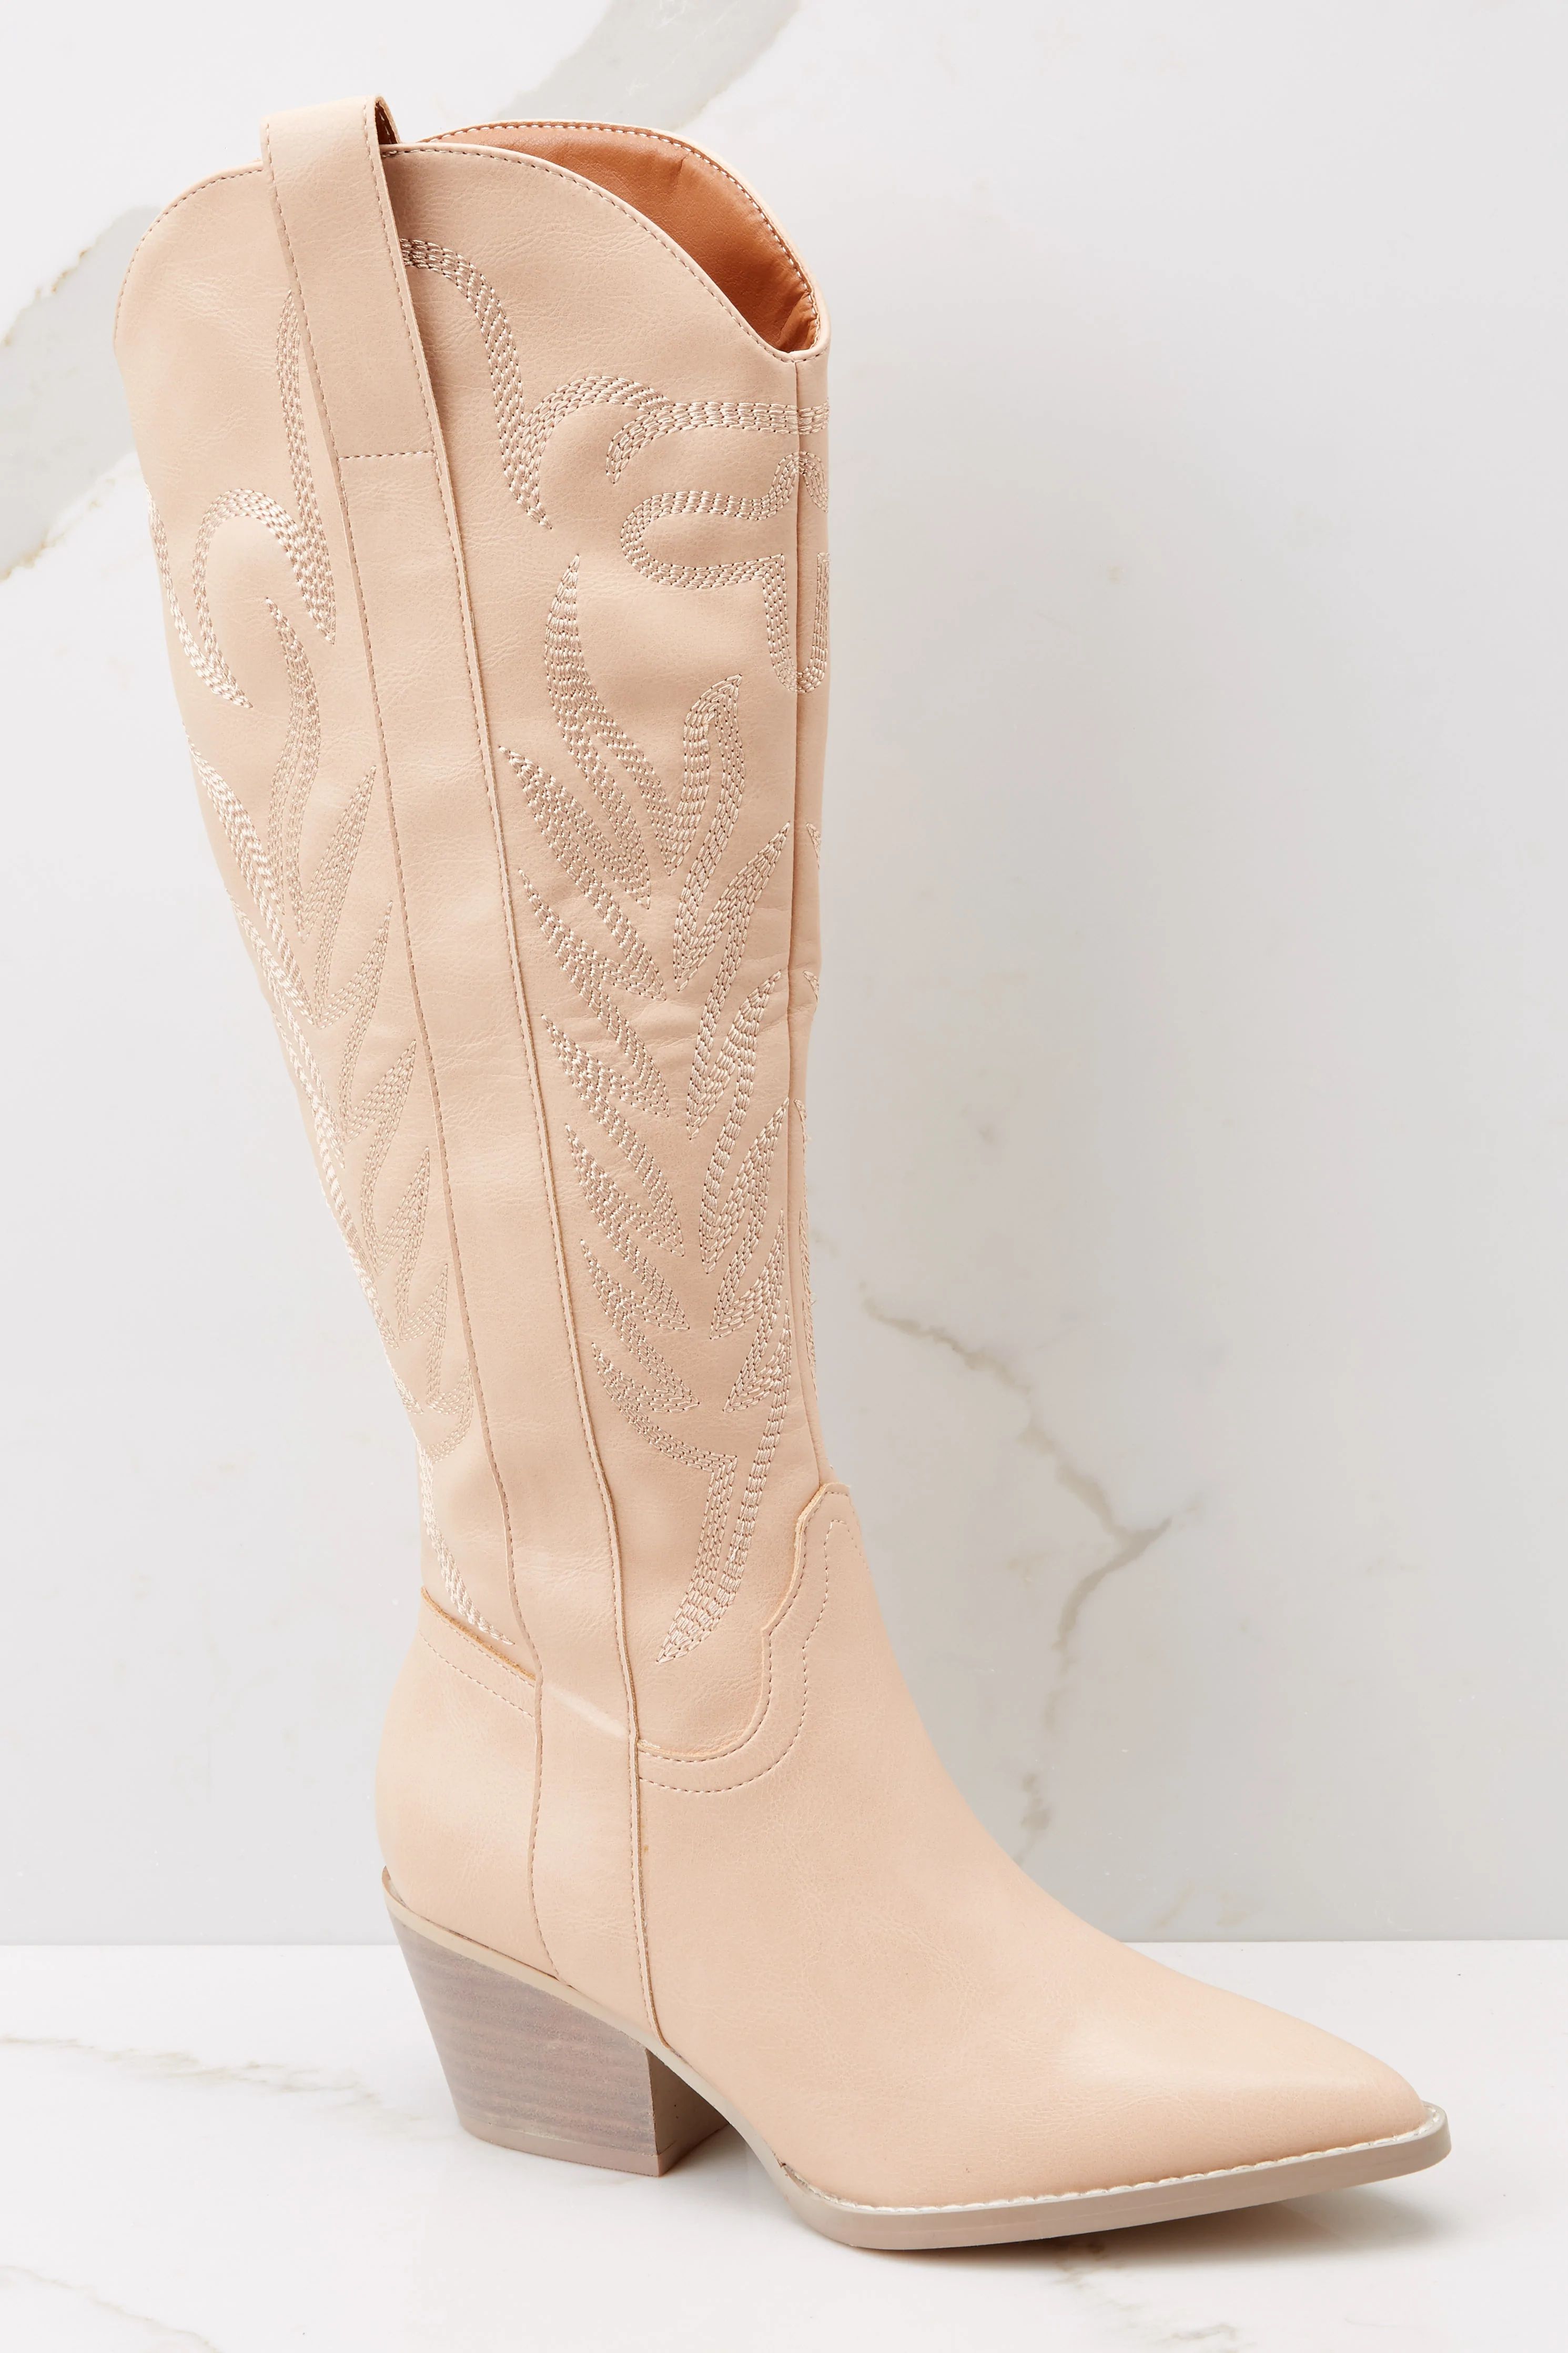 Bring The Sass Nude Boots | Red Dress 